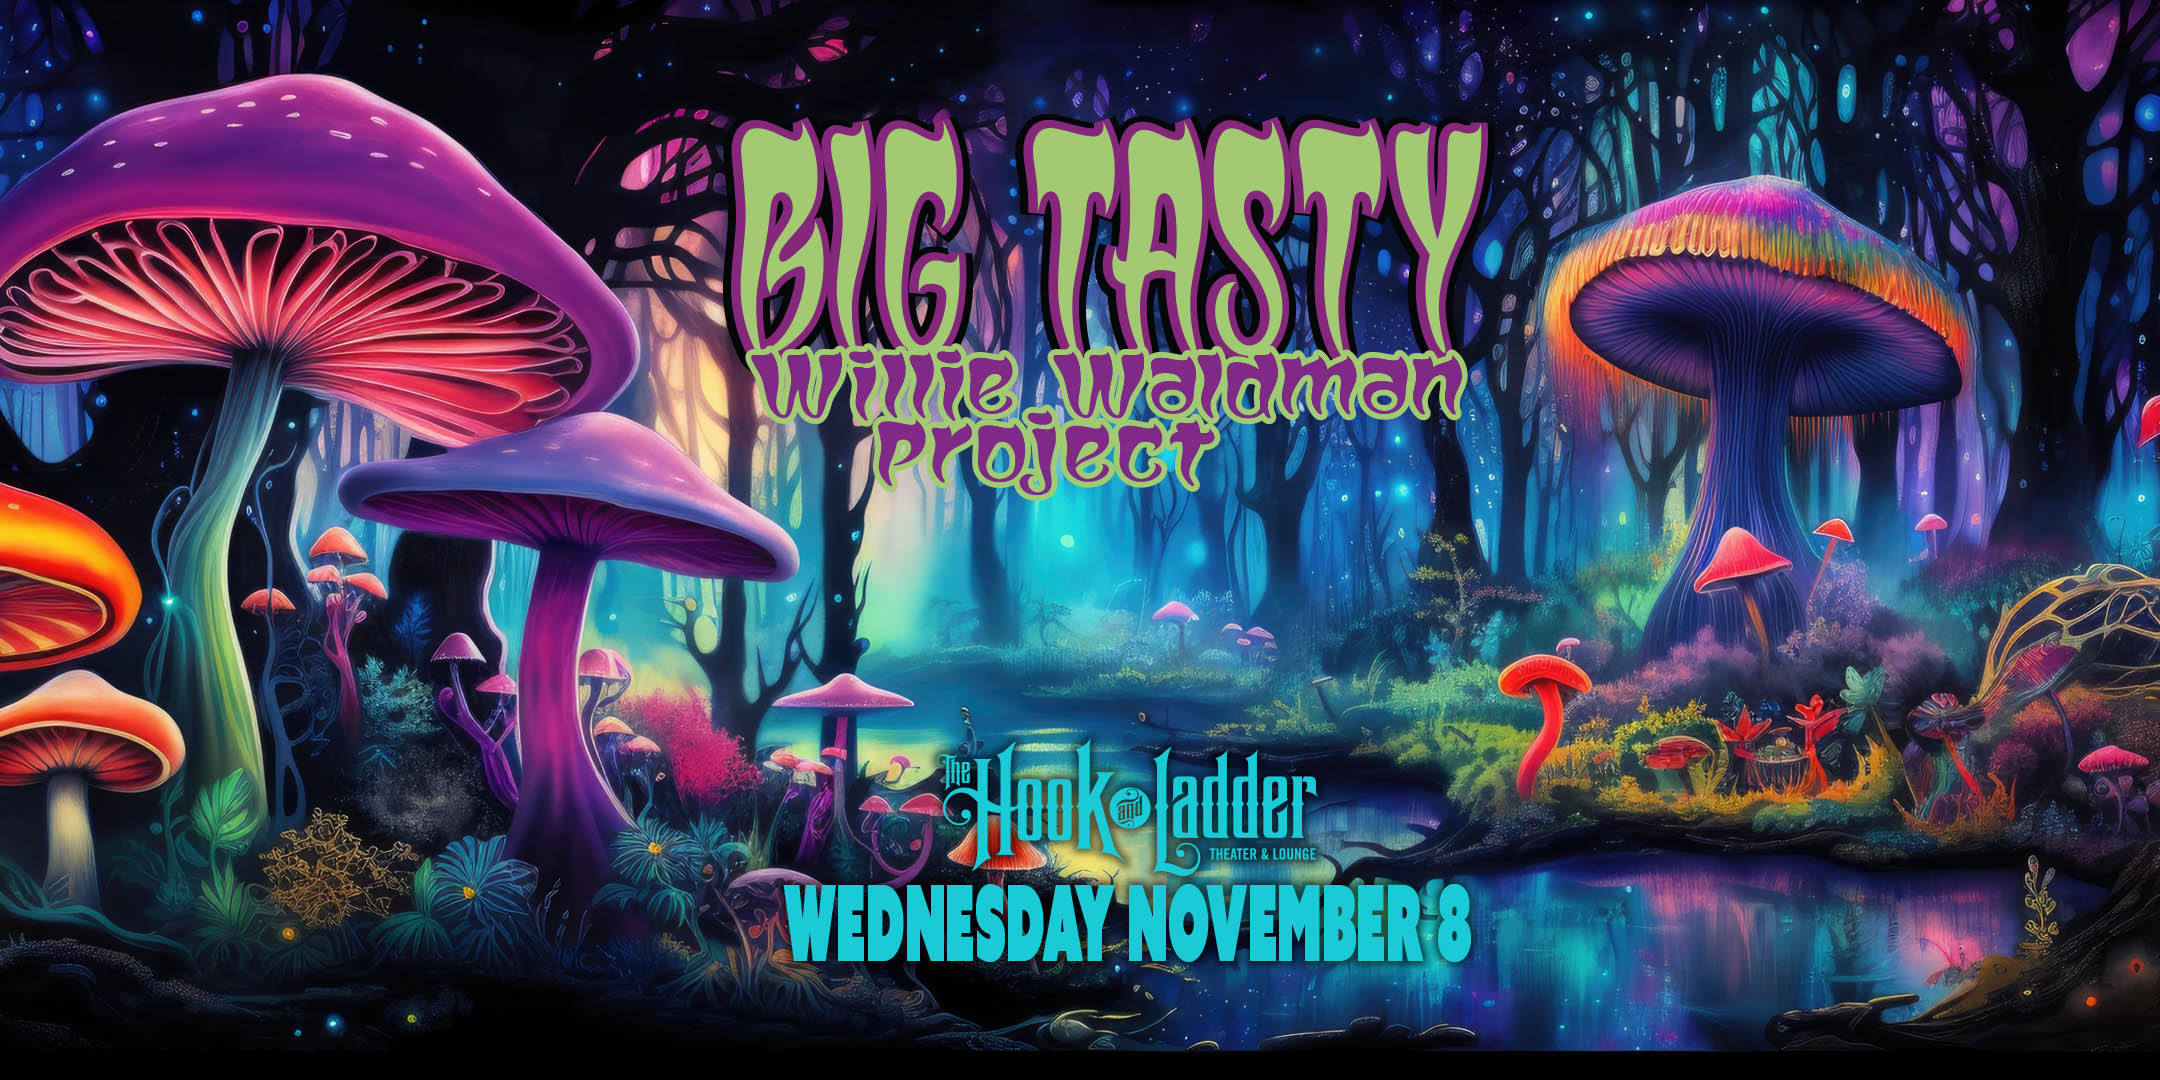 Big Tasty with Willie Waldman Project Wednesday, November 8 The Hook and Ladder Theater Doors 7:30pm :: Music 8:00pm :: 21+ GA*: $10 ADV / $15 DOS * Does not include fees NO REFUNDS